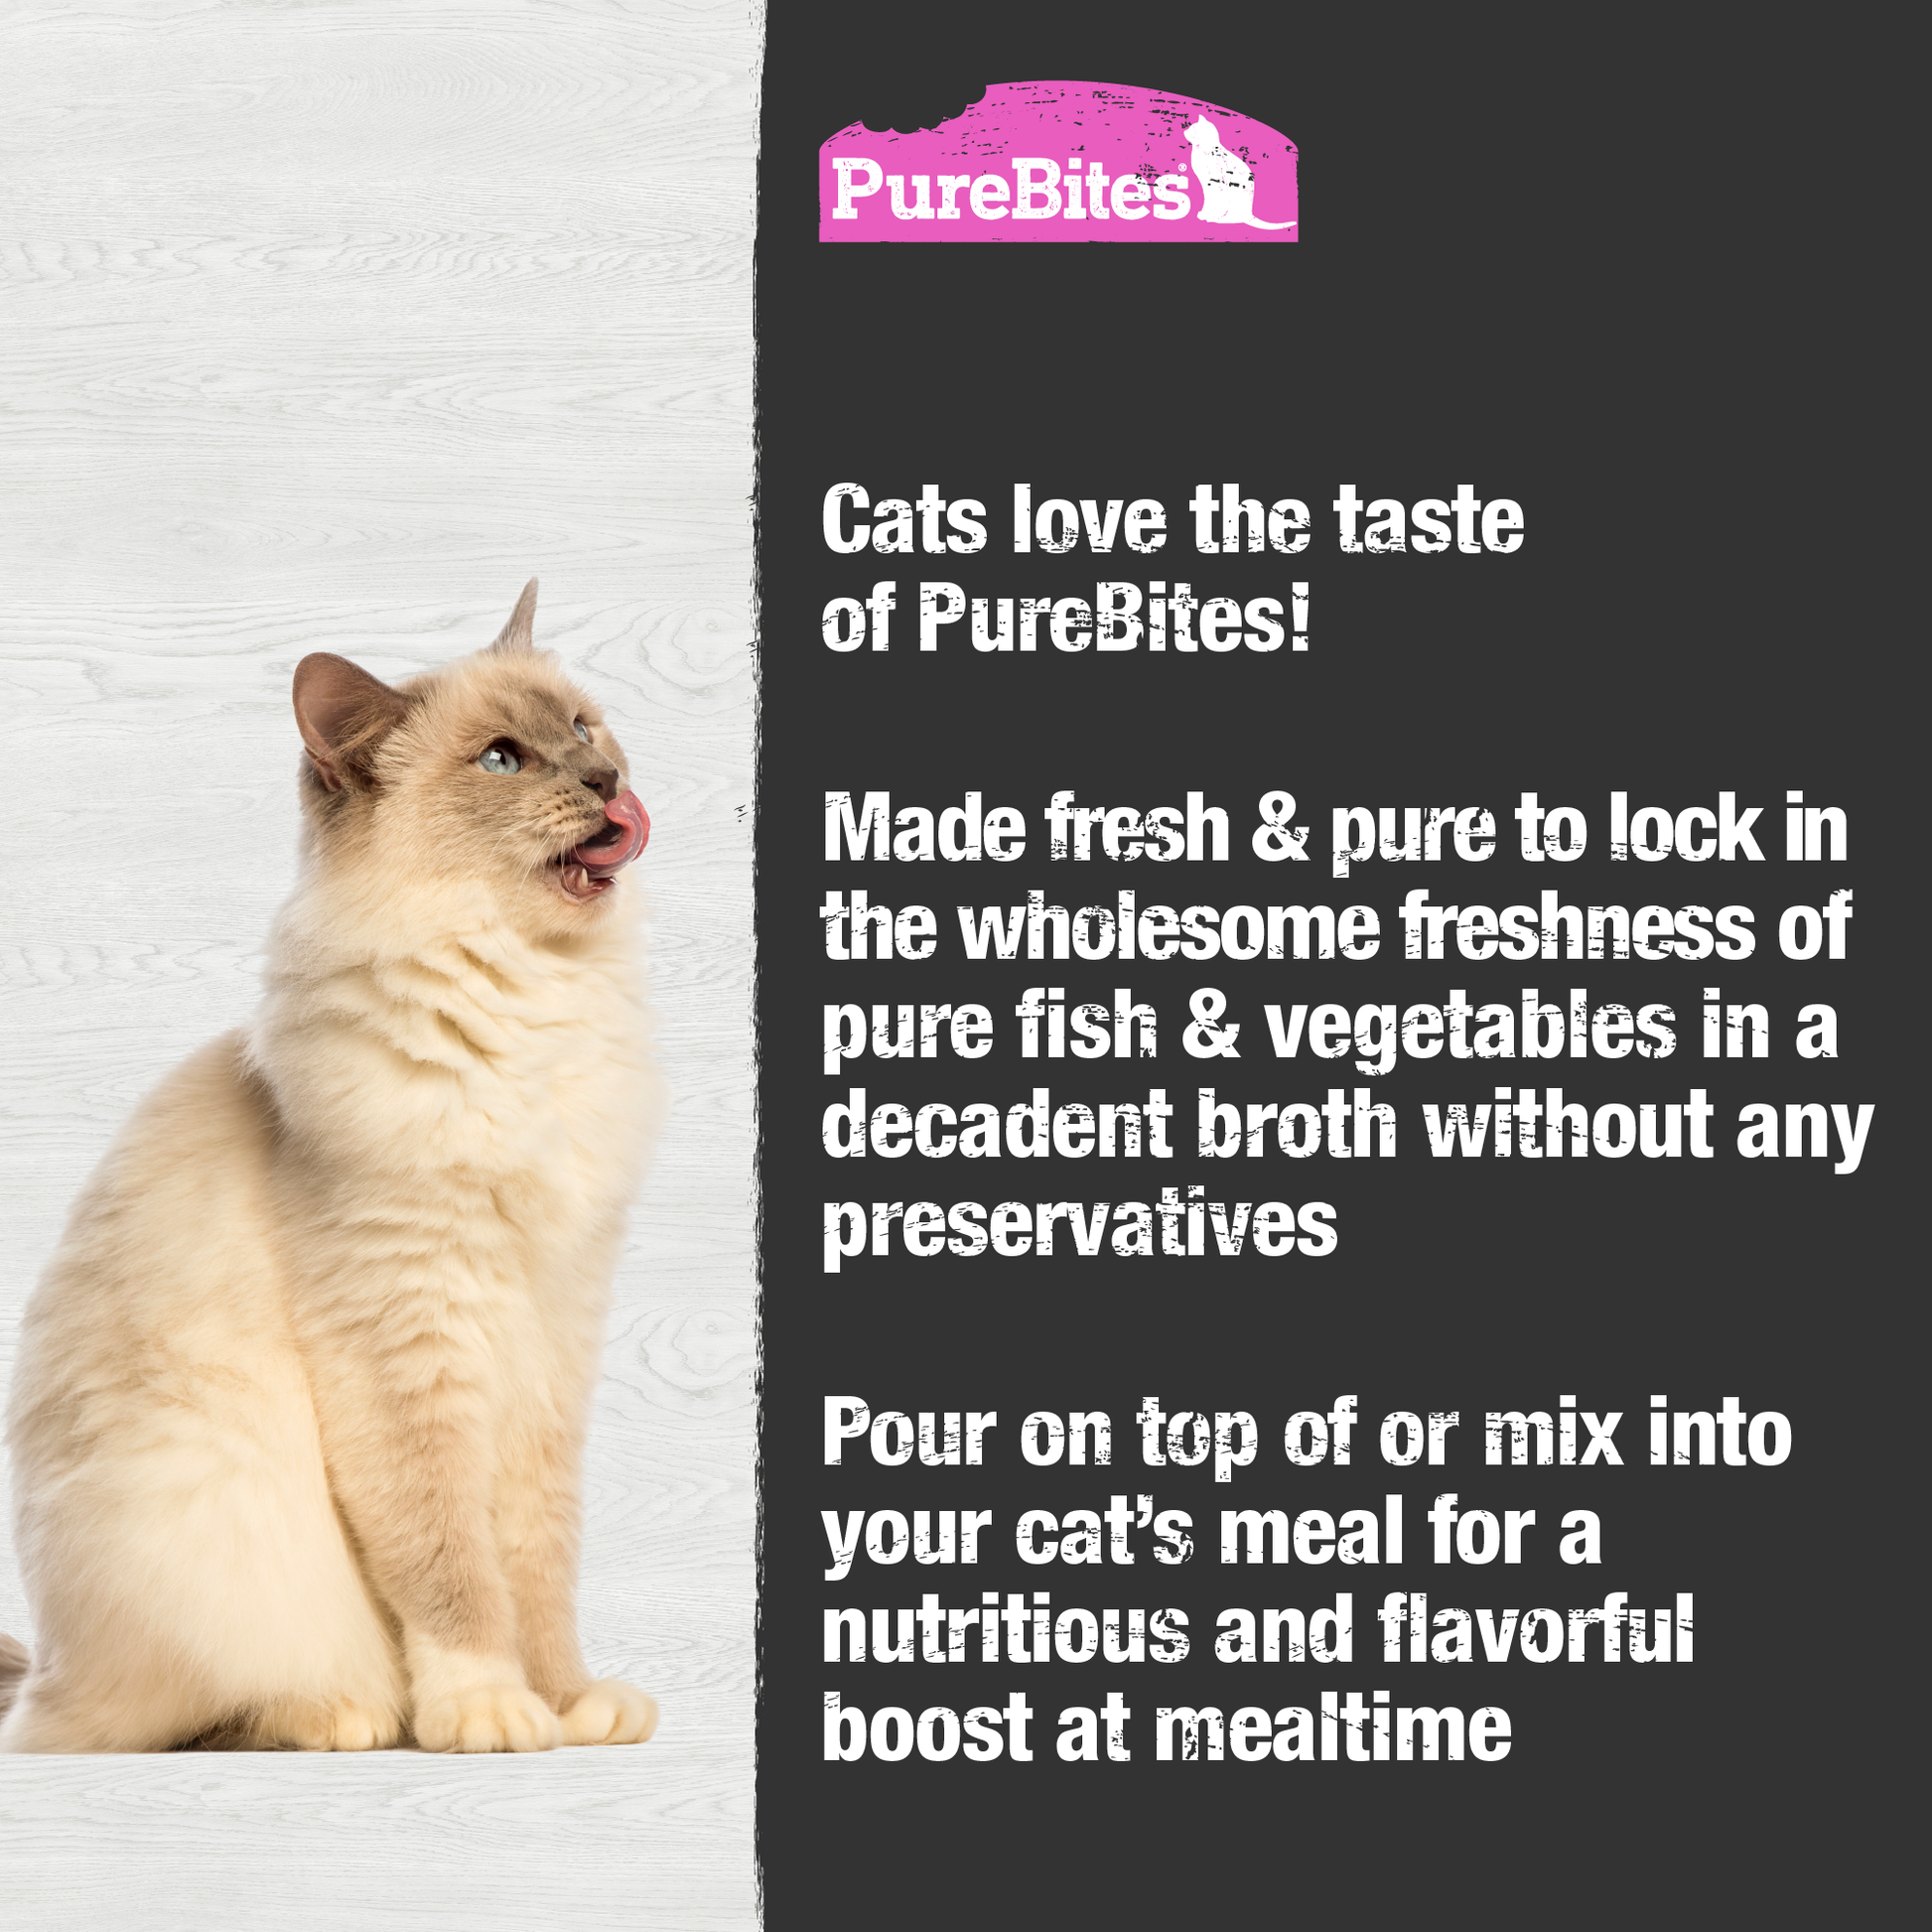 Made fresh & pure means more protein and nutrients packed into every pouch. With only tuna, salmon, and vegetables in a rich broth, it provides superior nutrition and mirrors a cat's ancestral diet.